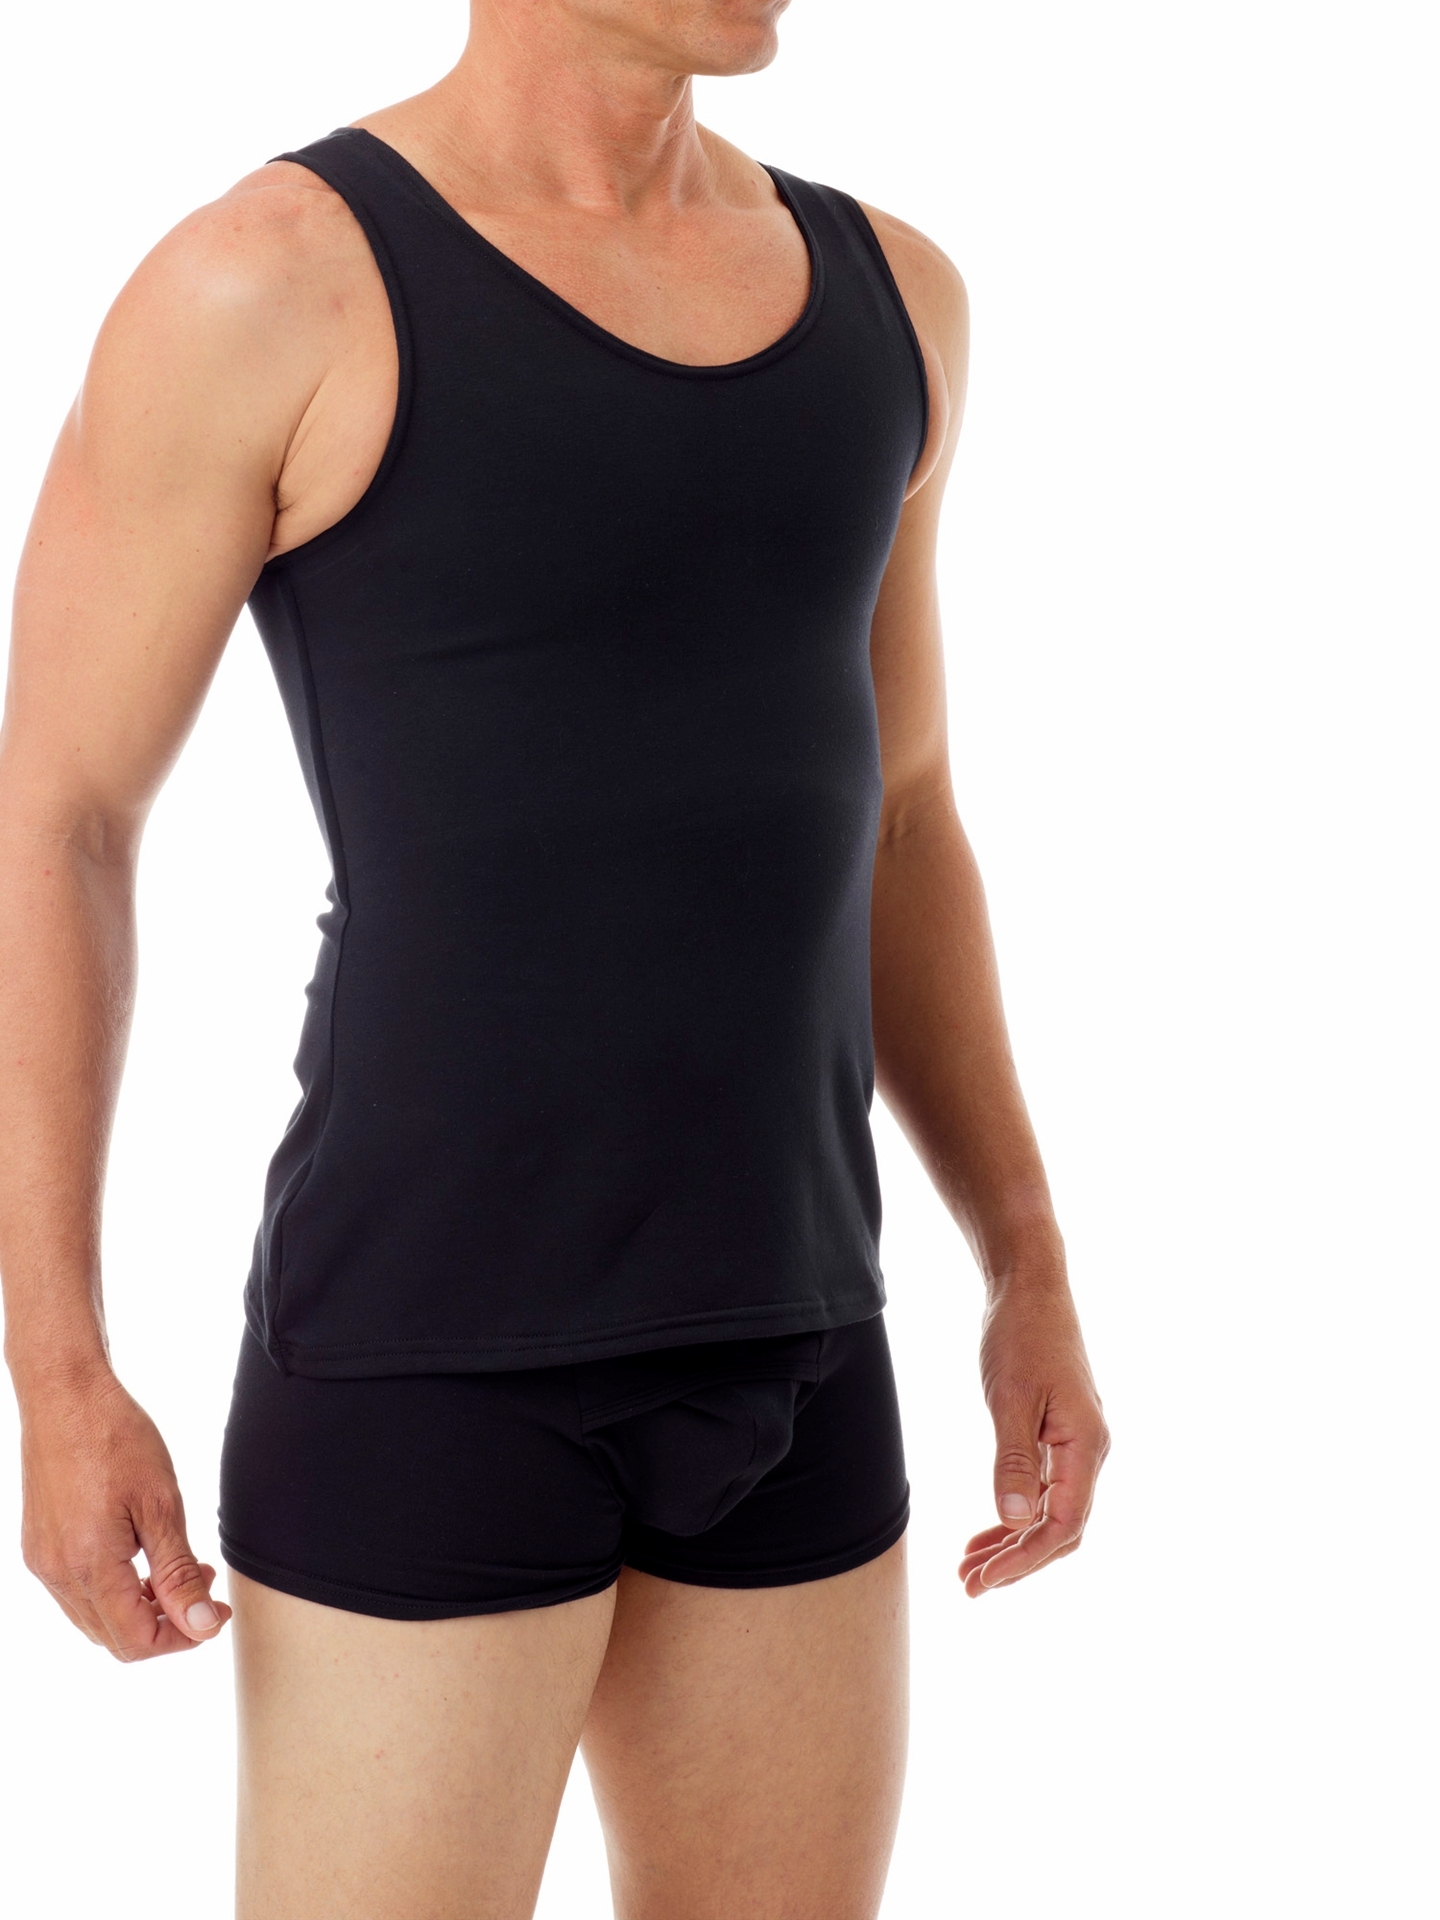 Tri-top Chest Binder - provide maximum comfortable and extreme chest binding..  Men Compression Shirts, Girdles, Chest Bin…